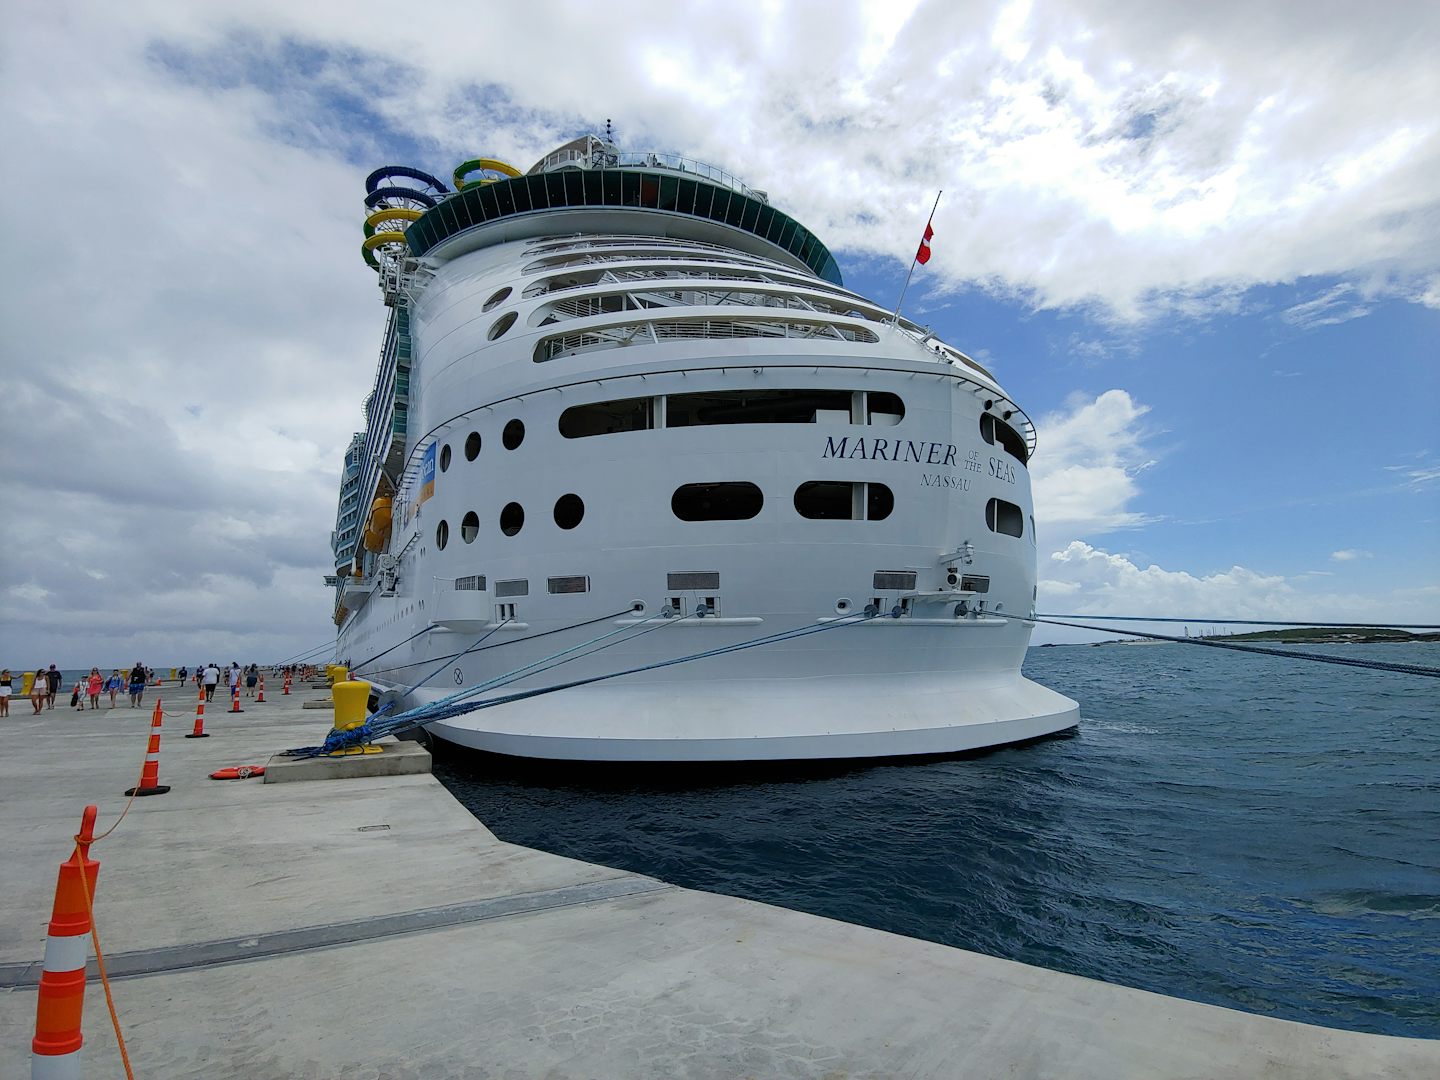 Mariner of the Seas at CocoCay in May 2019